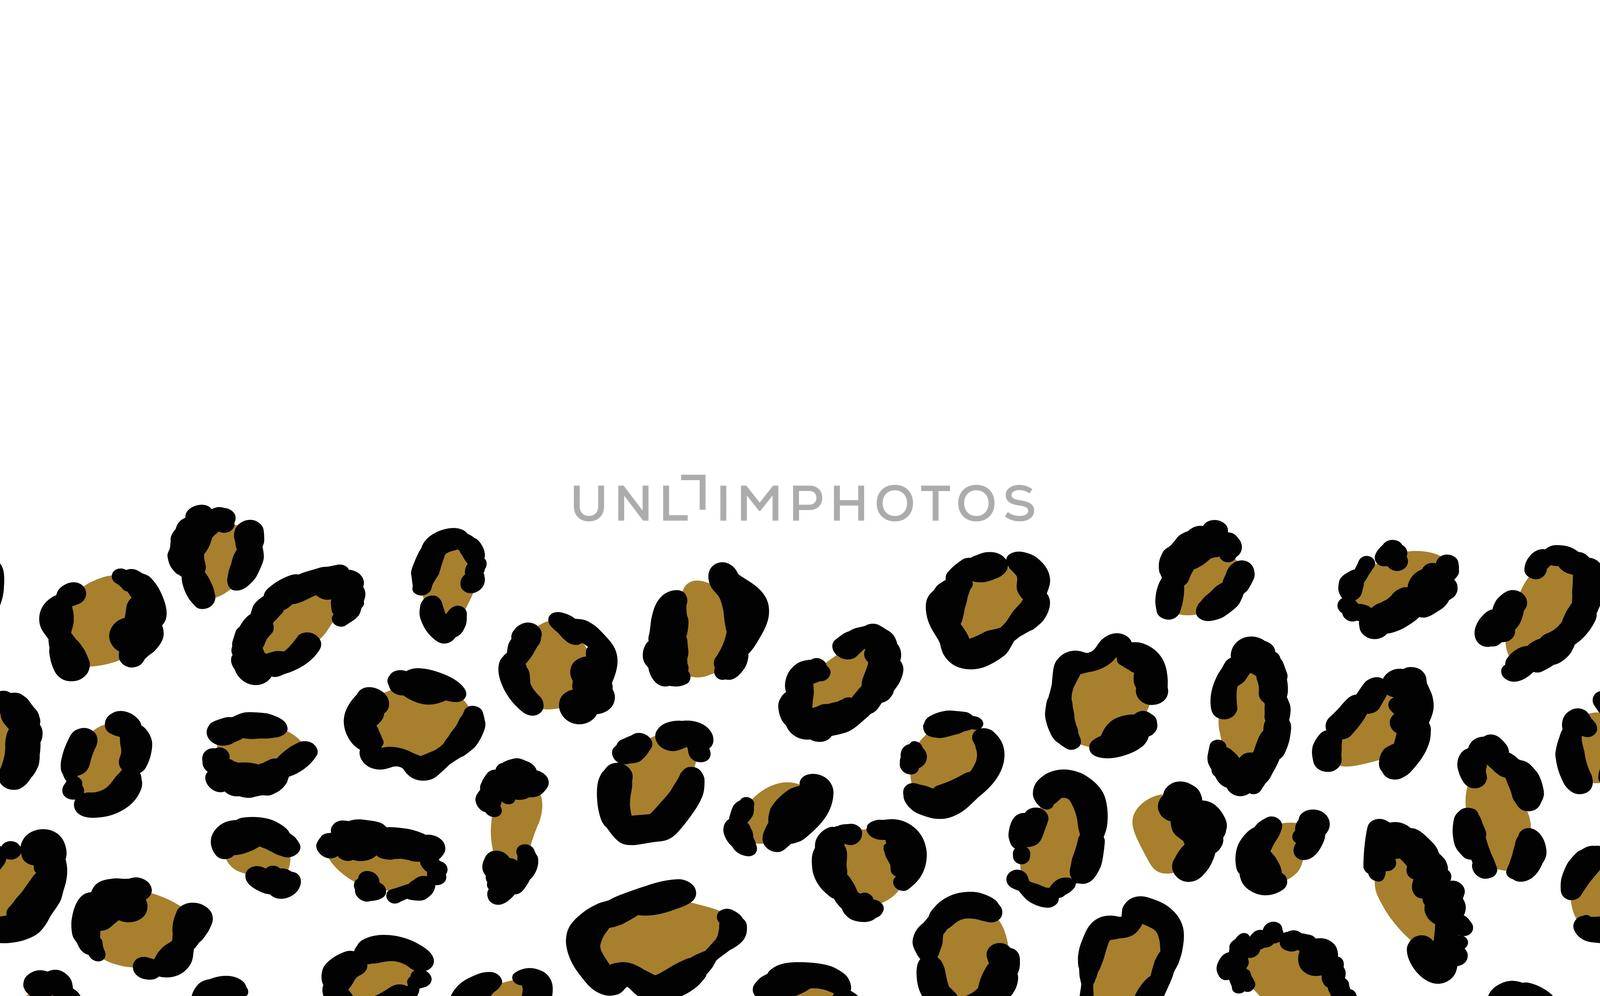 New modern leopard black and white background. Ornament of stylized animal skin. Abstract geometric vector illustration for leaflet, banner, website, poster, card, postcard, wallpaper. Copy space.